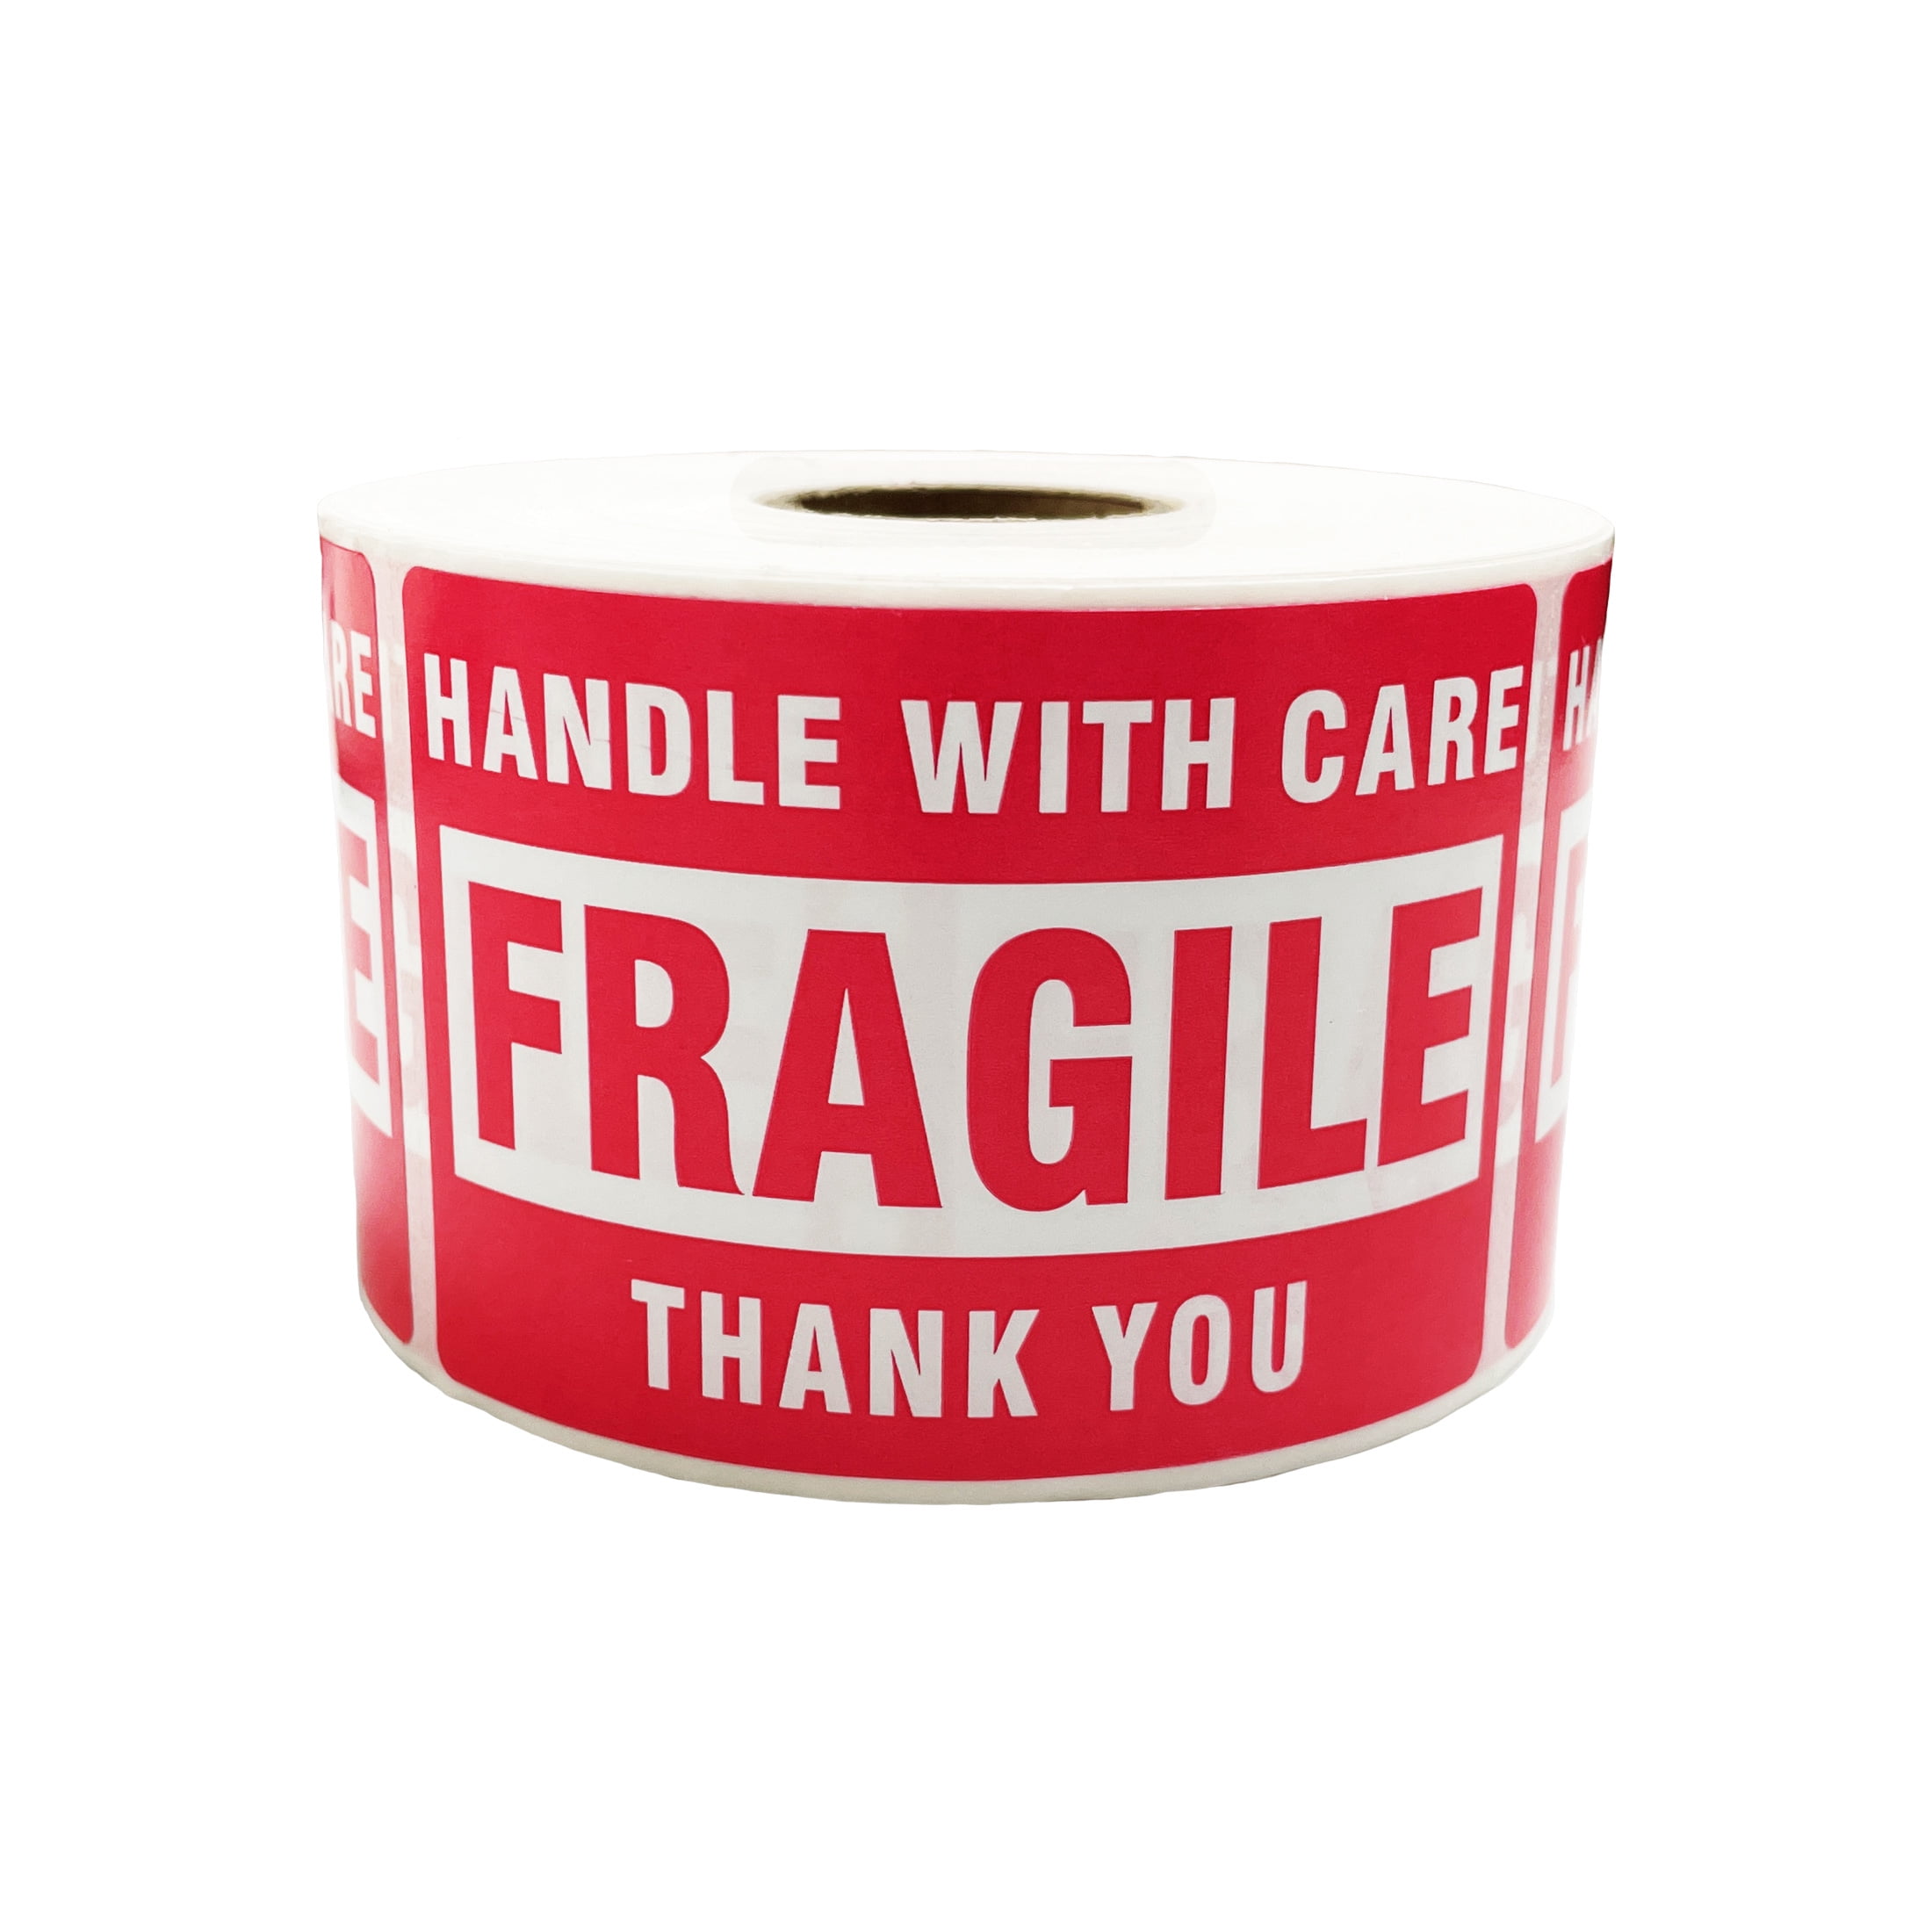 100 2x3 FRAGILE Stickers Handle with Care plus 15 WHITE Thank You Stickers Ship 